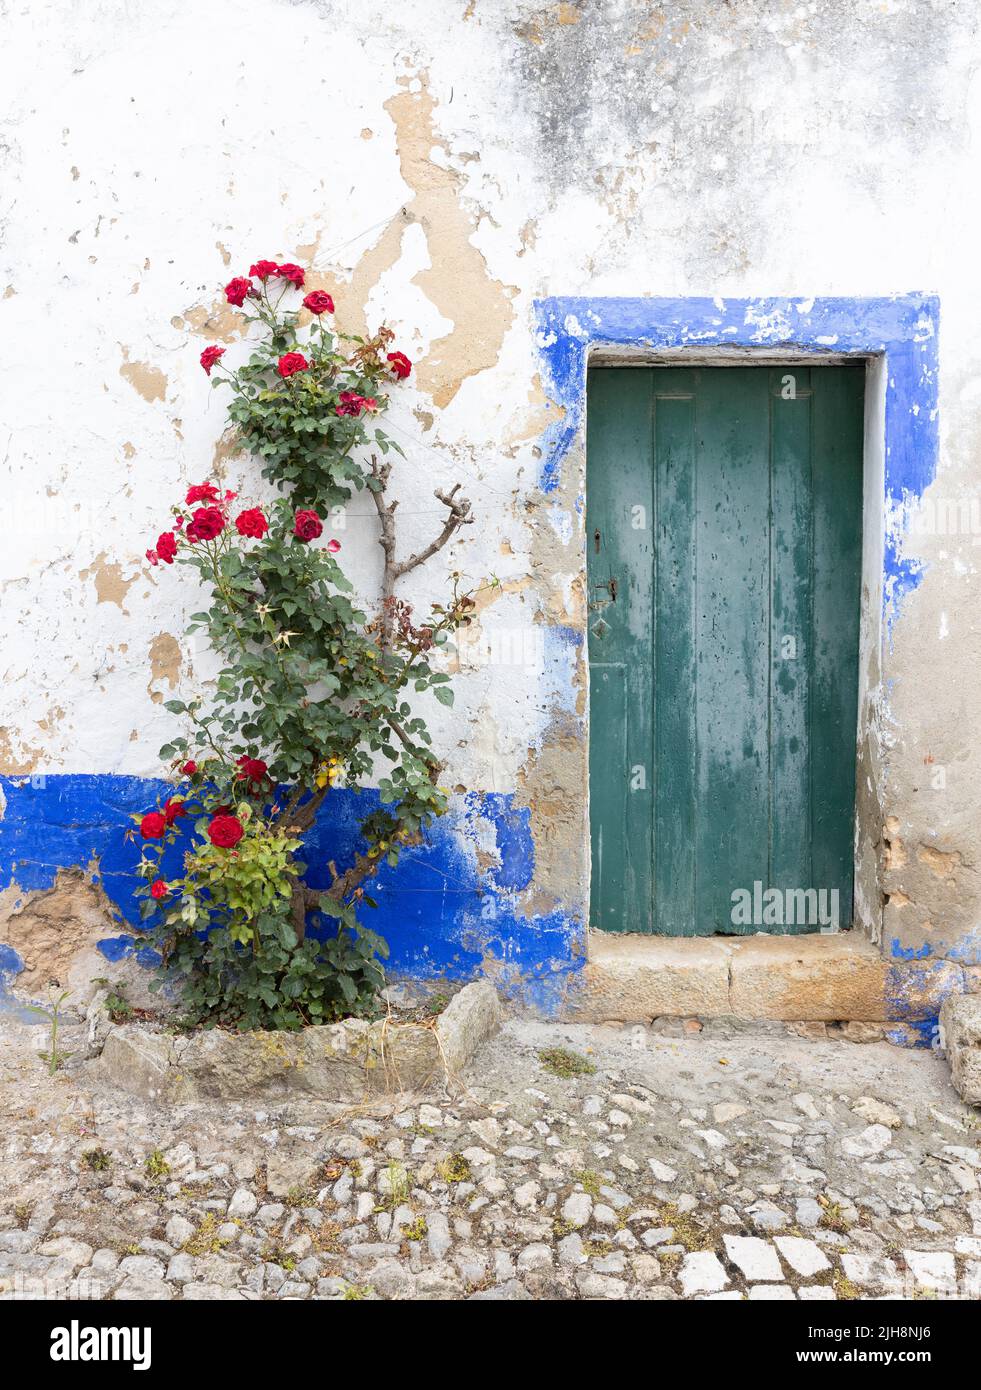 The city of Óbidos, Portugal: Old door and rose bush Stock Photo